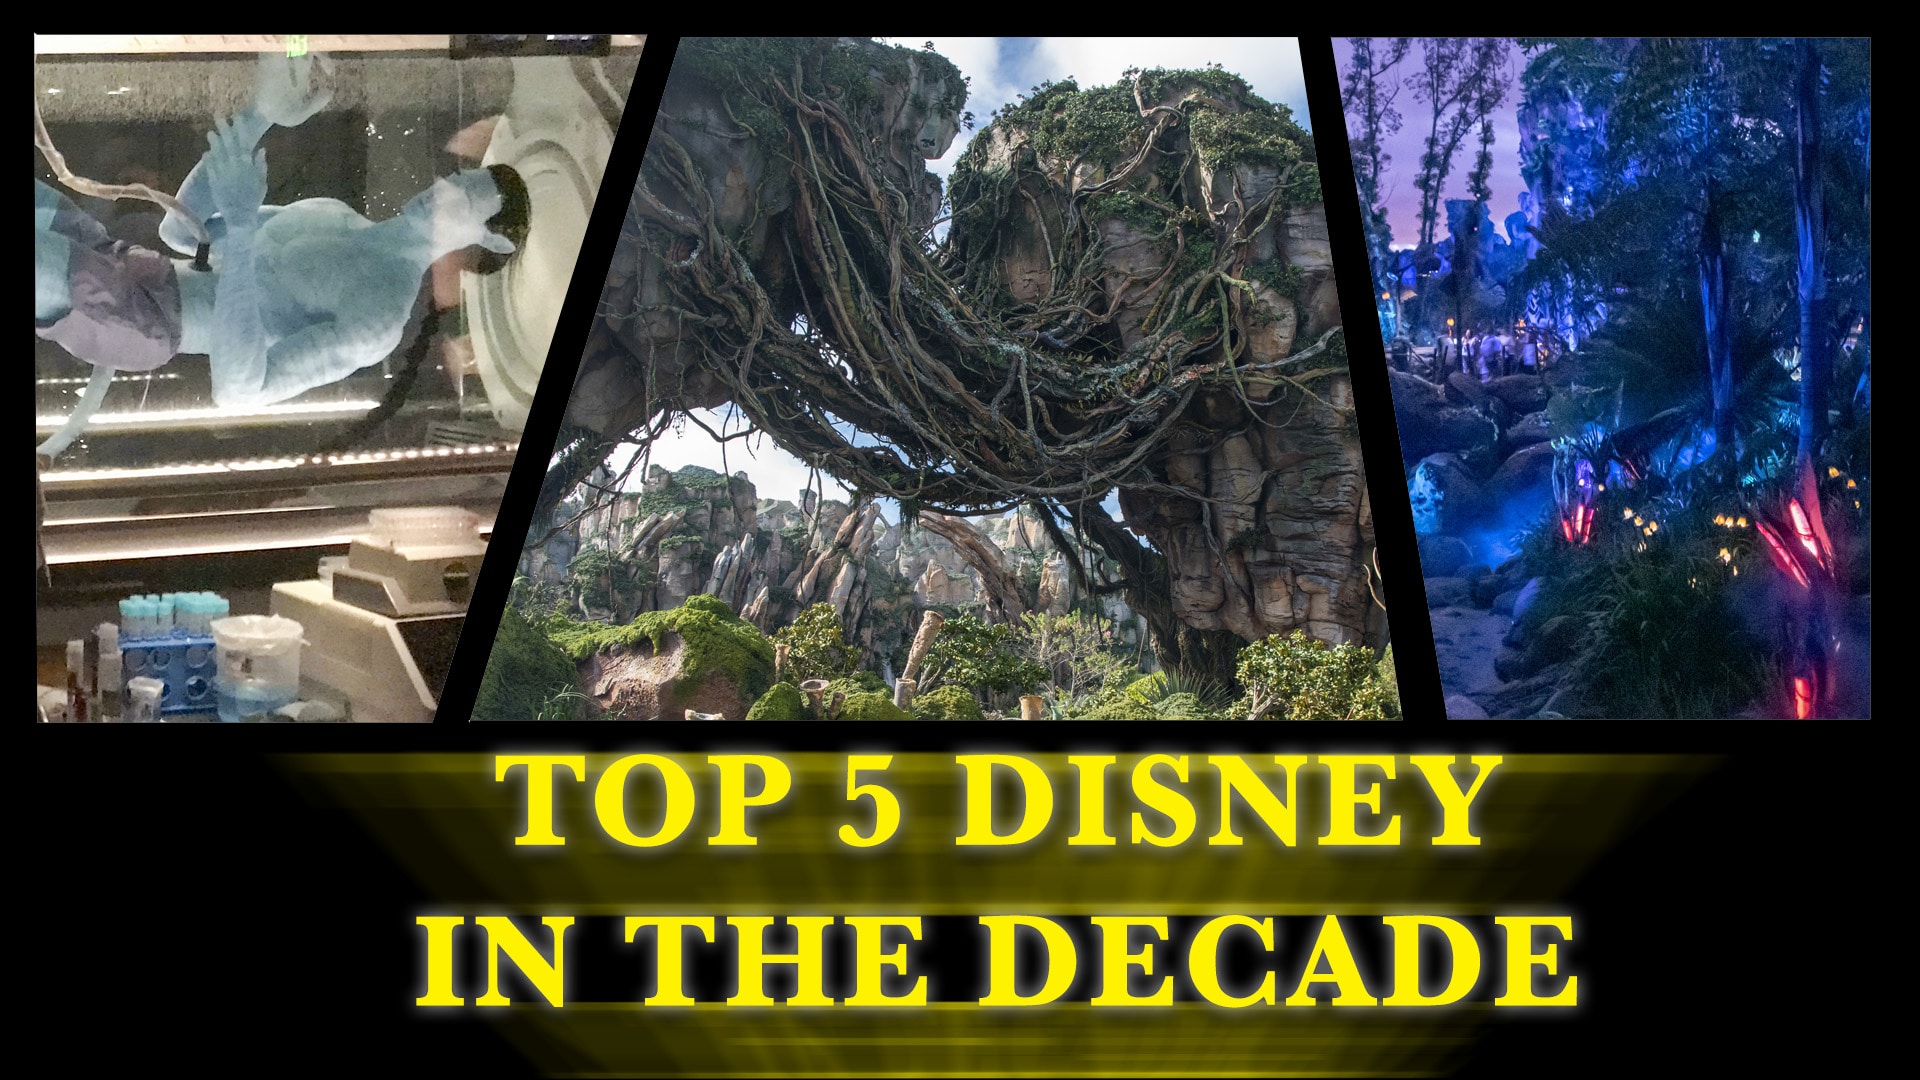 Pandora the World of Avatar – #4 of Top 5 Disney Stories of the Decade